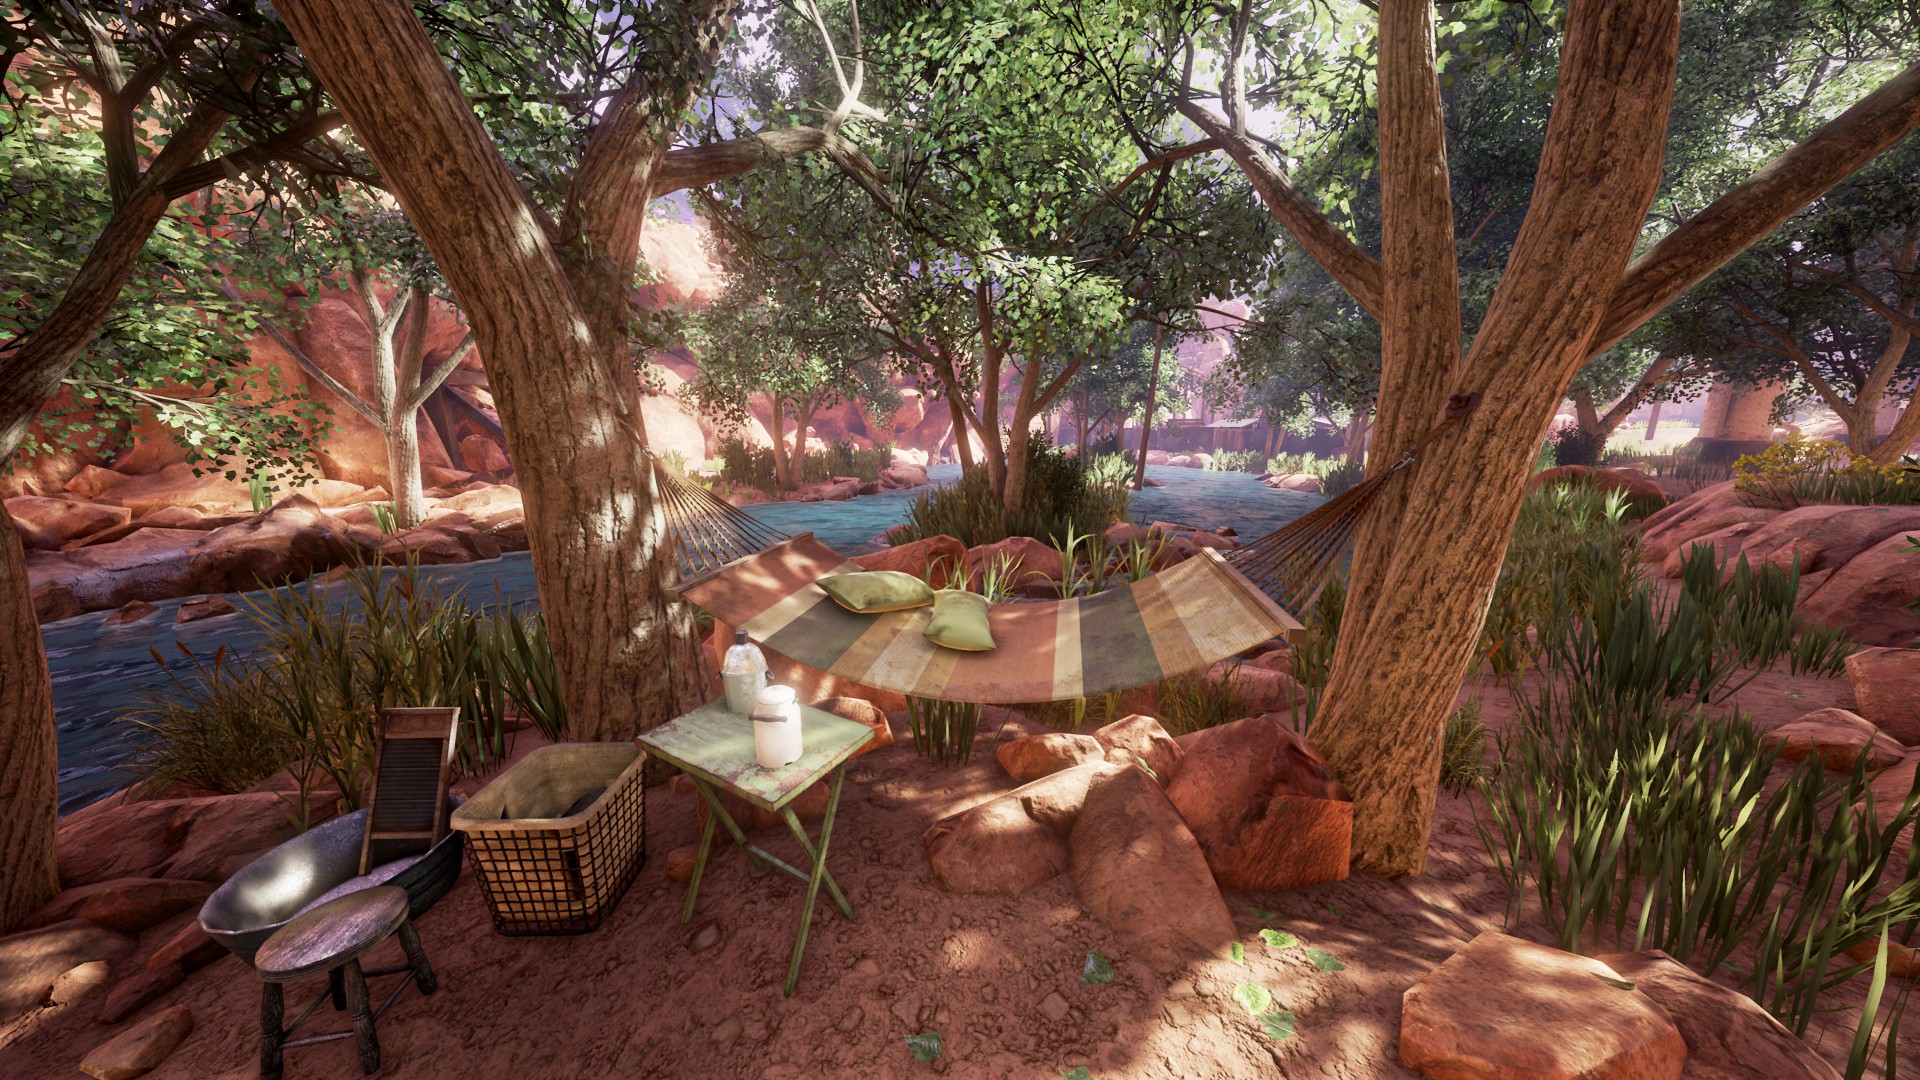 download obduction steam for free